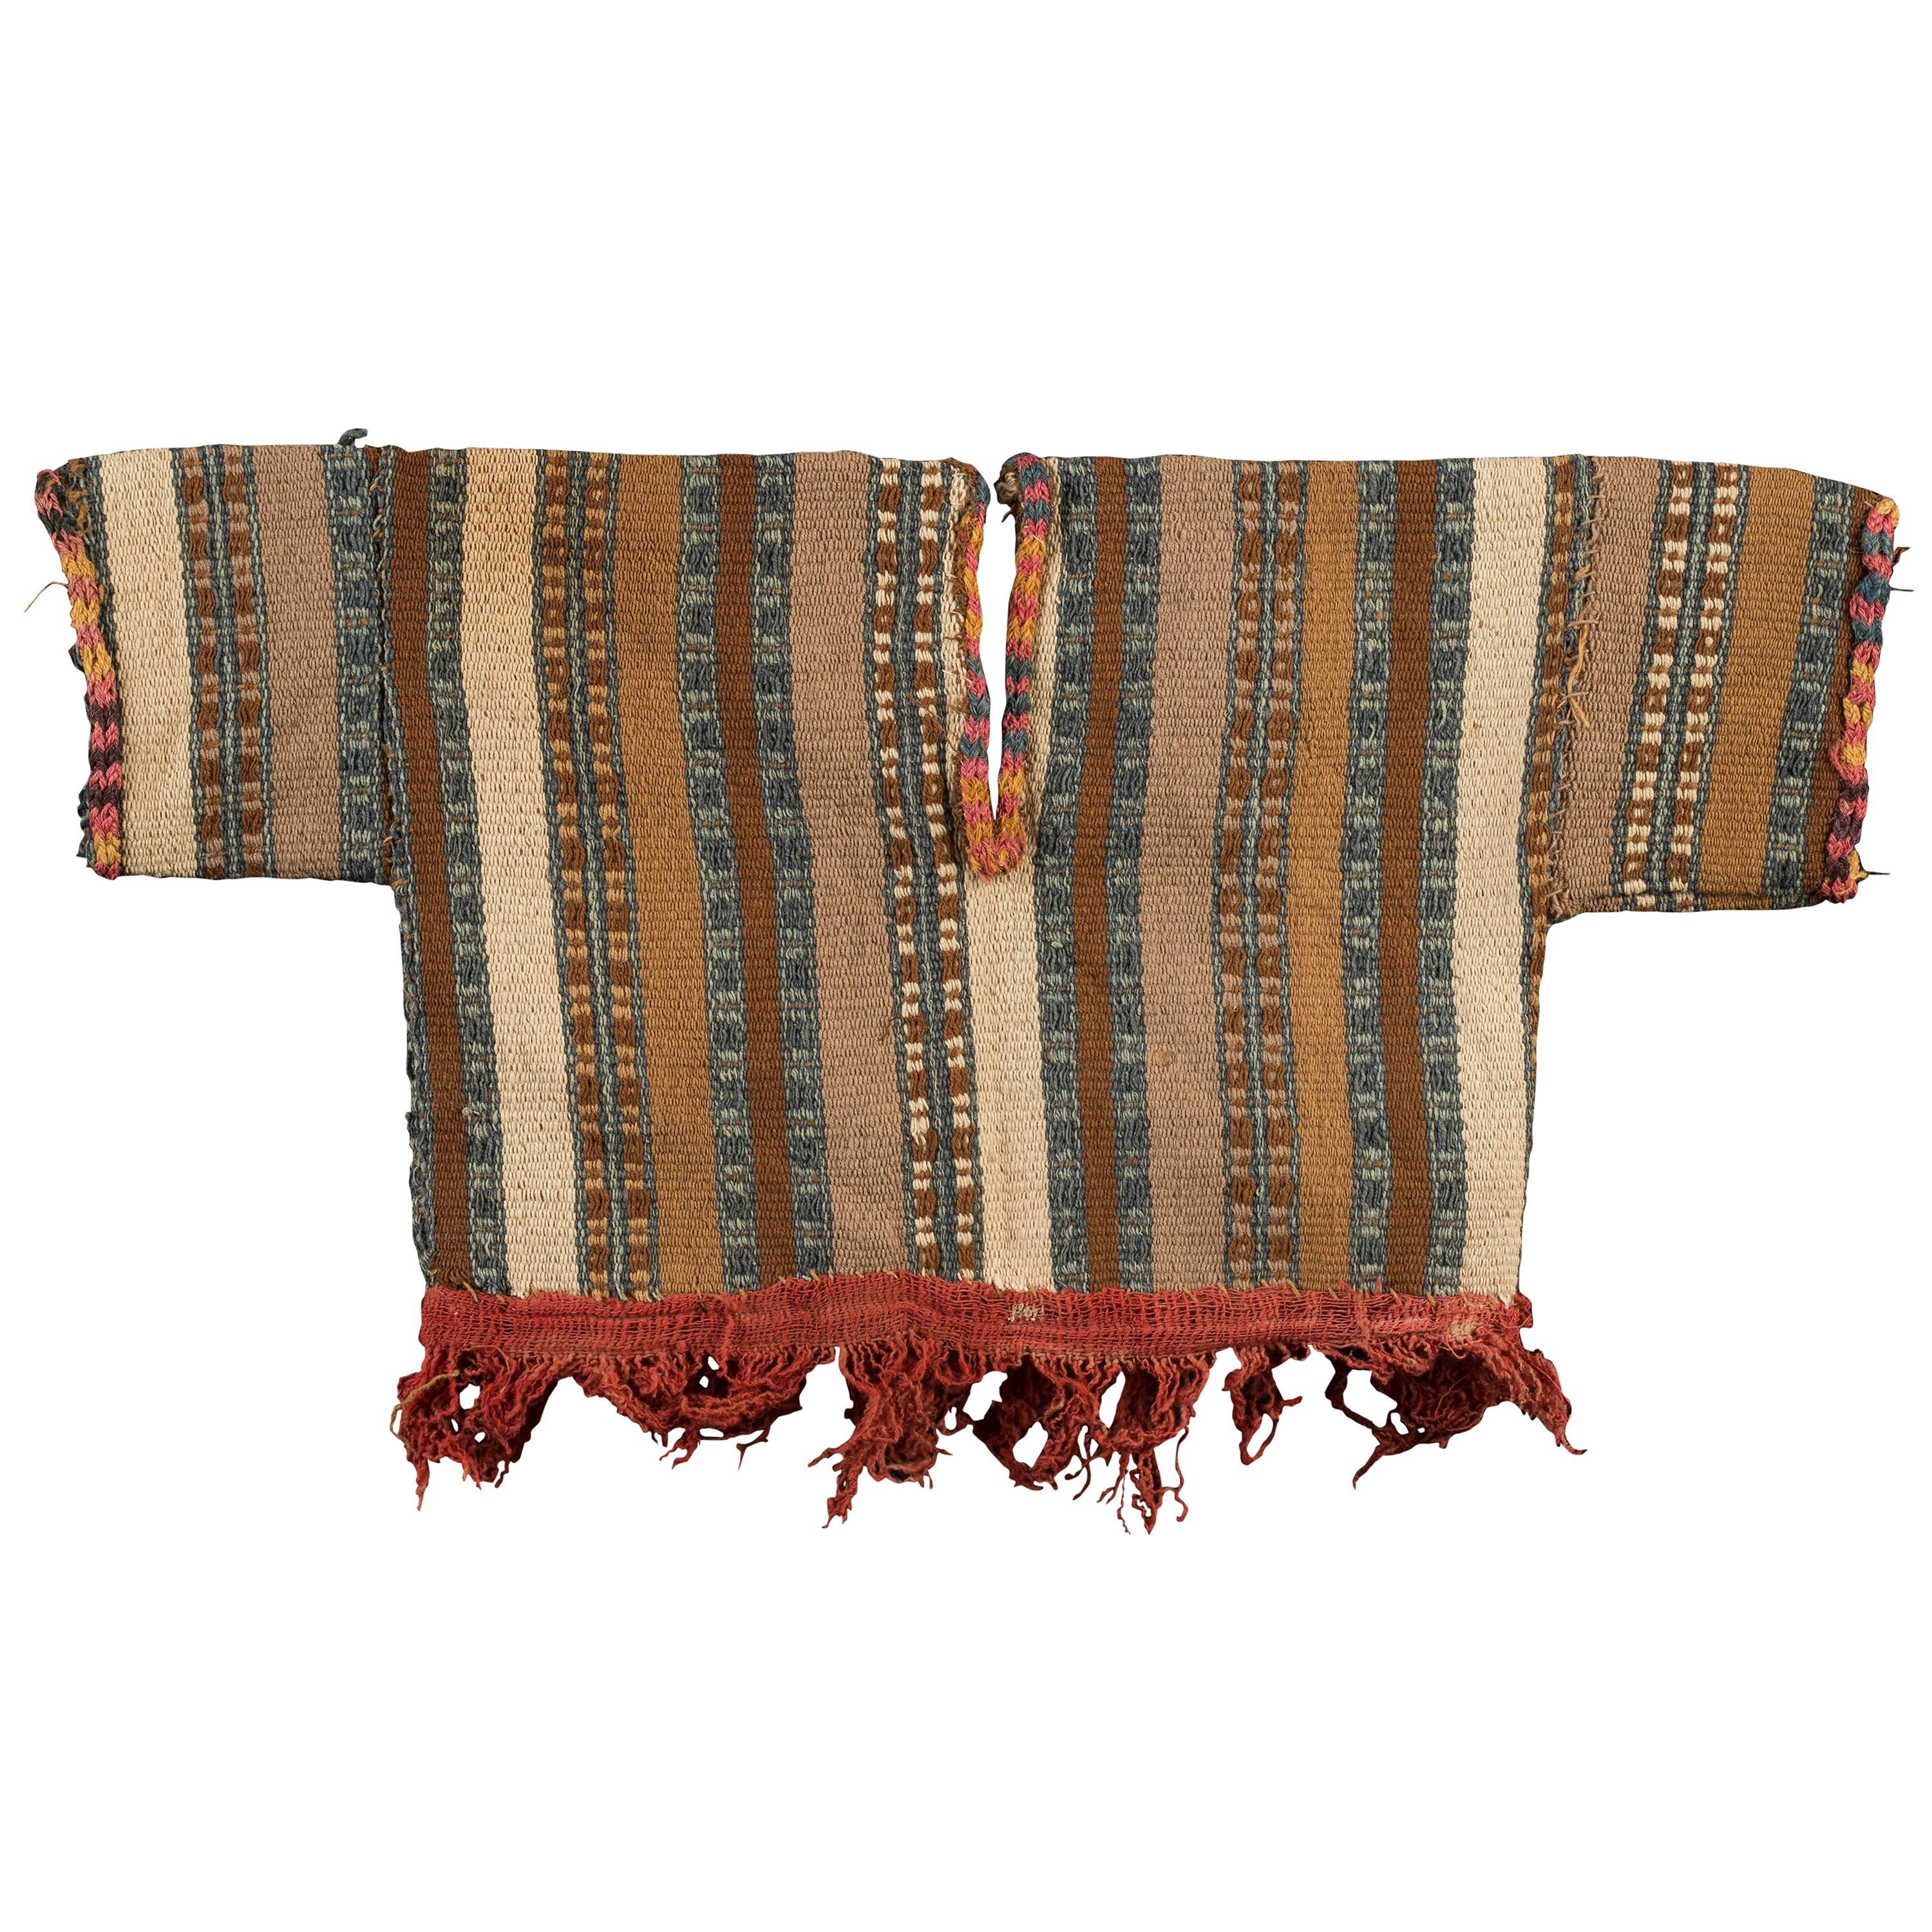 Complete Nazca Baby Poncho with Red Fringe